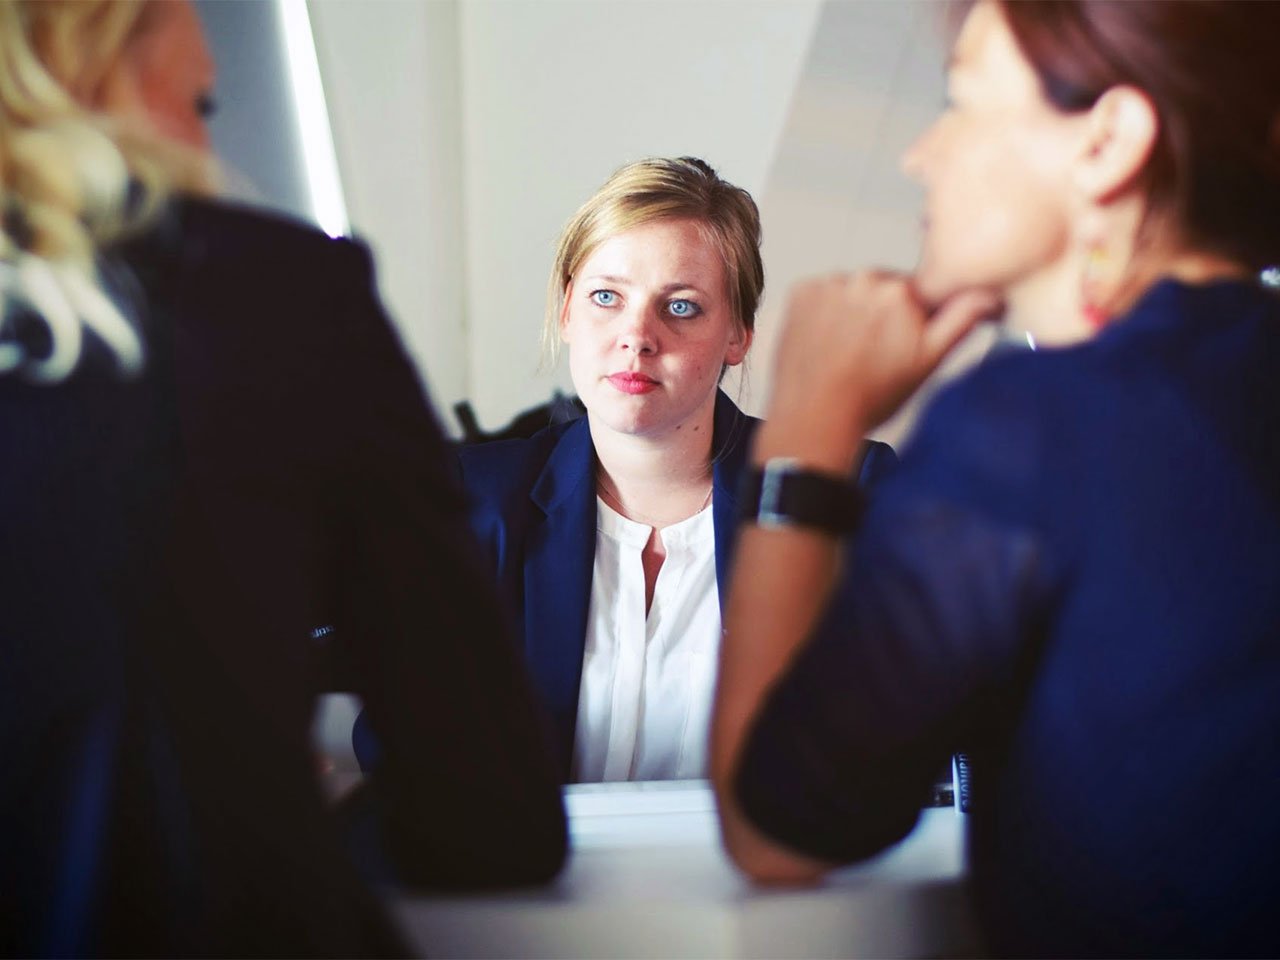 Why Most Women Don’t Want Their Boss’s Job